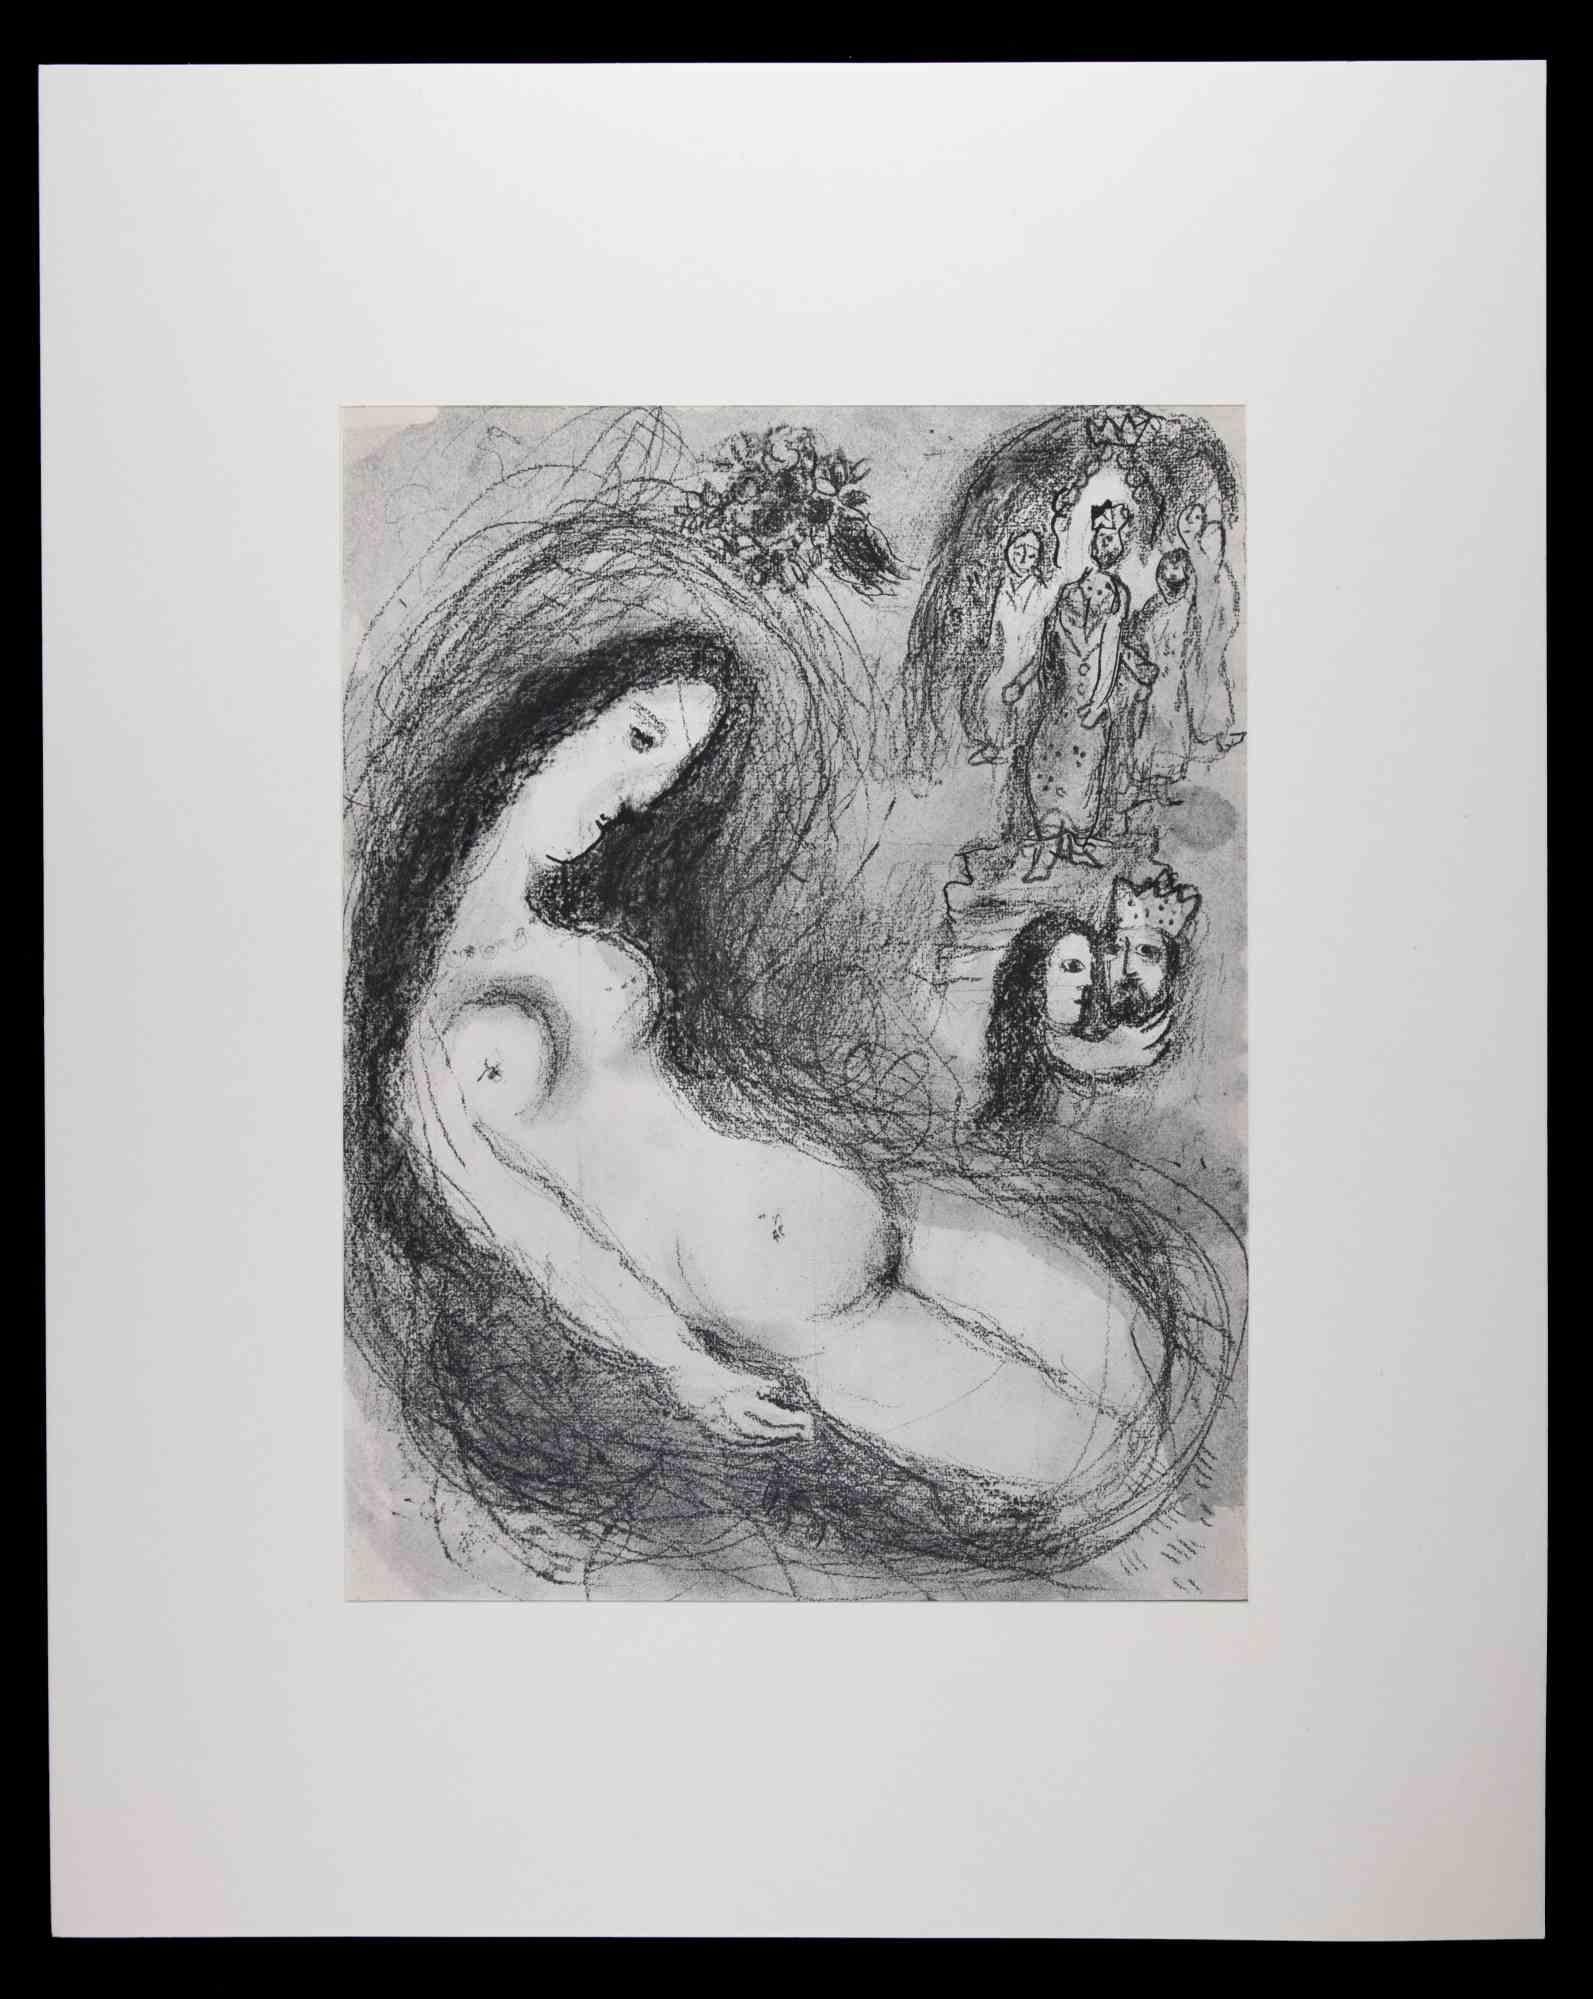 Plate from "Dessins pour la bible", editions Verve, is a splendid héliogravure realized by Marc Chagall in 1960.

This beautiful artwork belongs to the issue of Verve that includes the artworks that Marc Chagall made in 1958 and 1959 on biblical